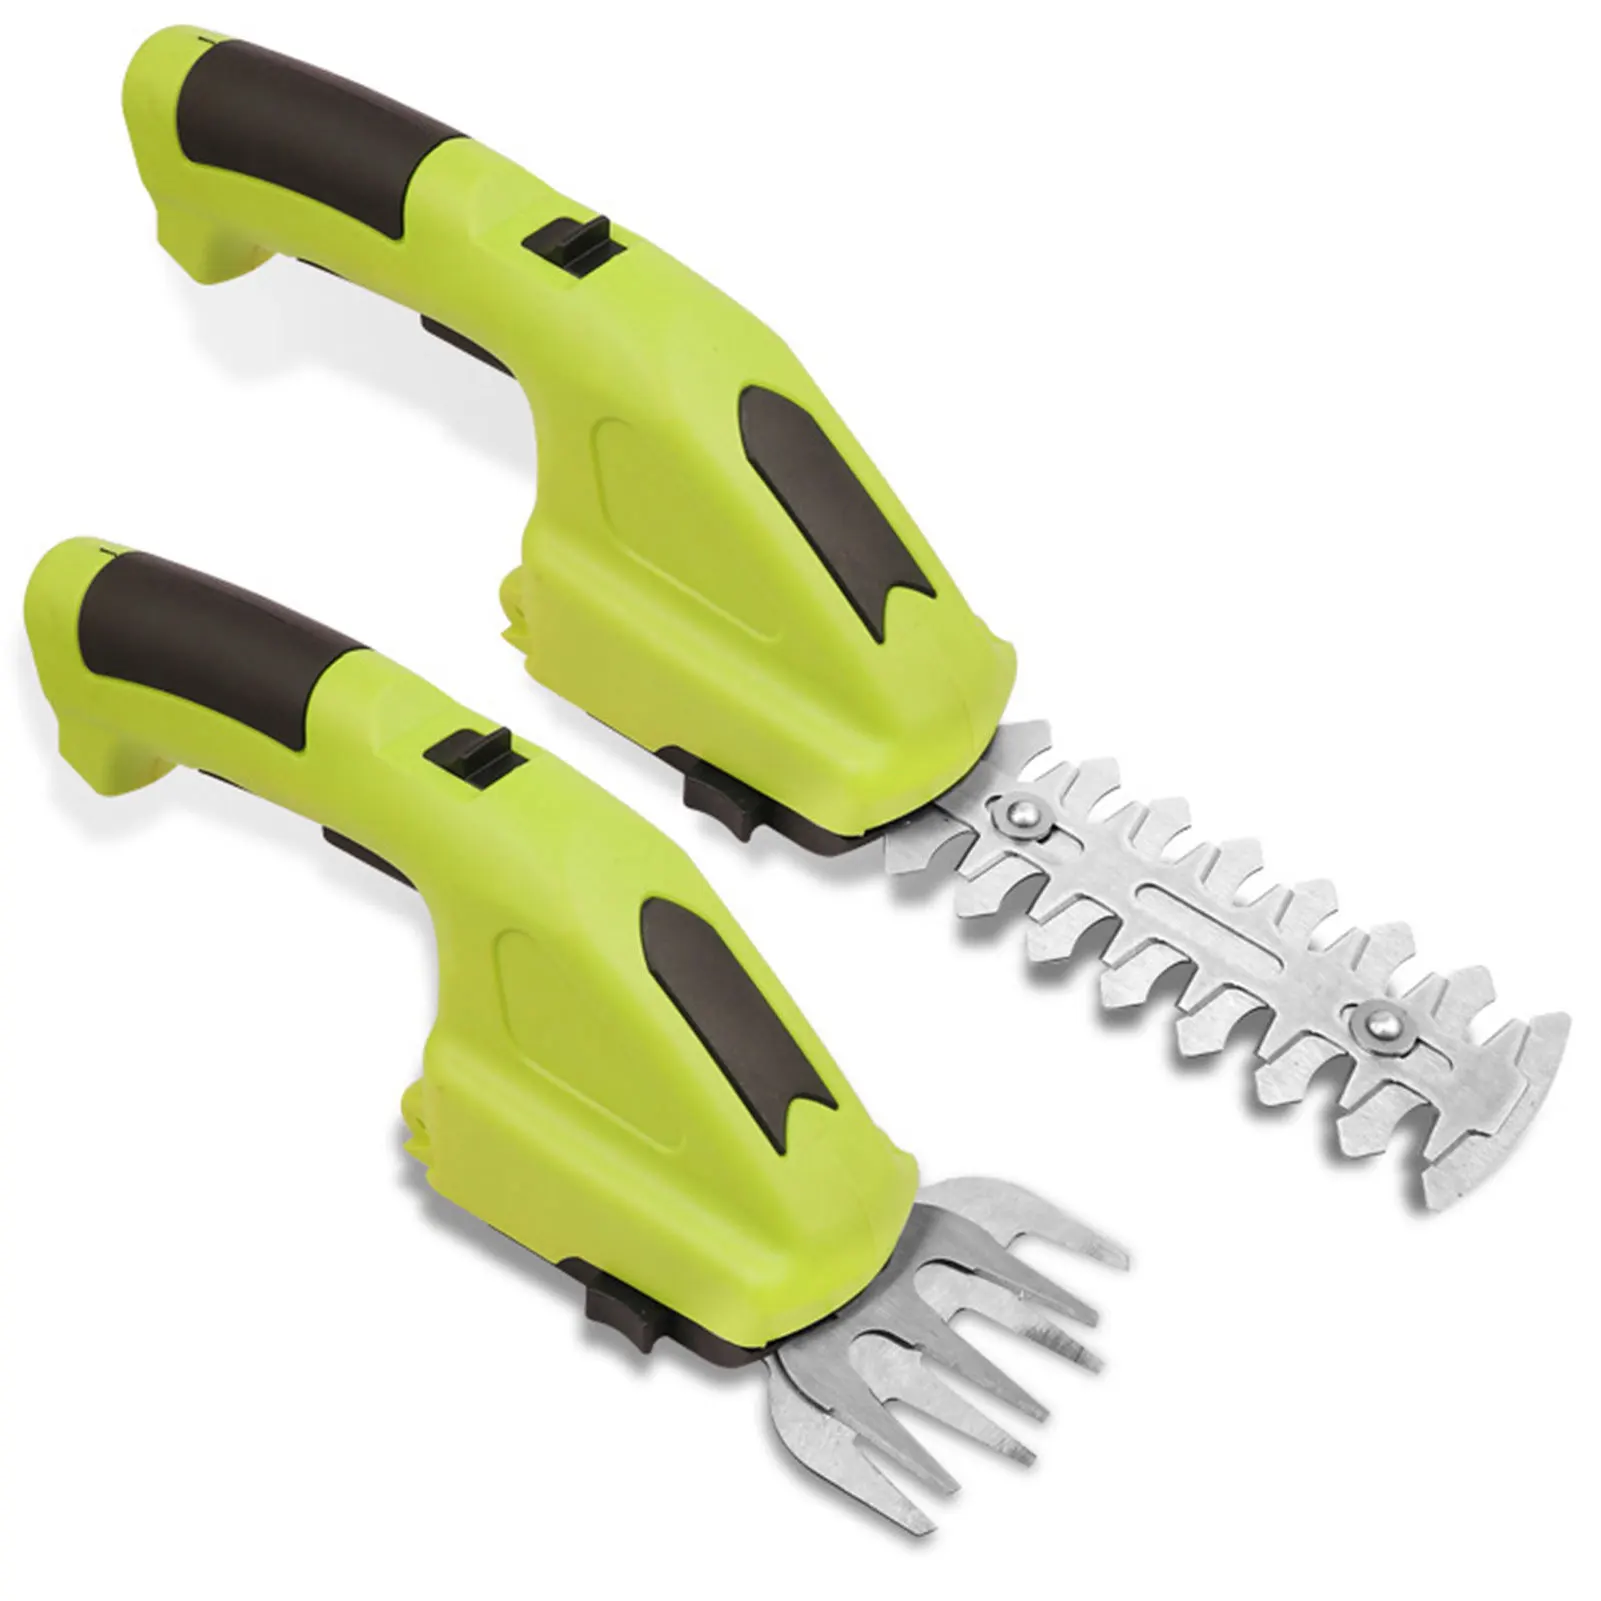 

2 in 1 Electric Tree Trimmers Handheld Branch Cutter 3.6V 1300mAH for Lawn Yard Garden